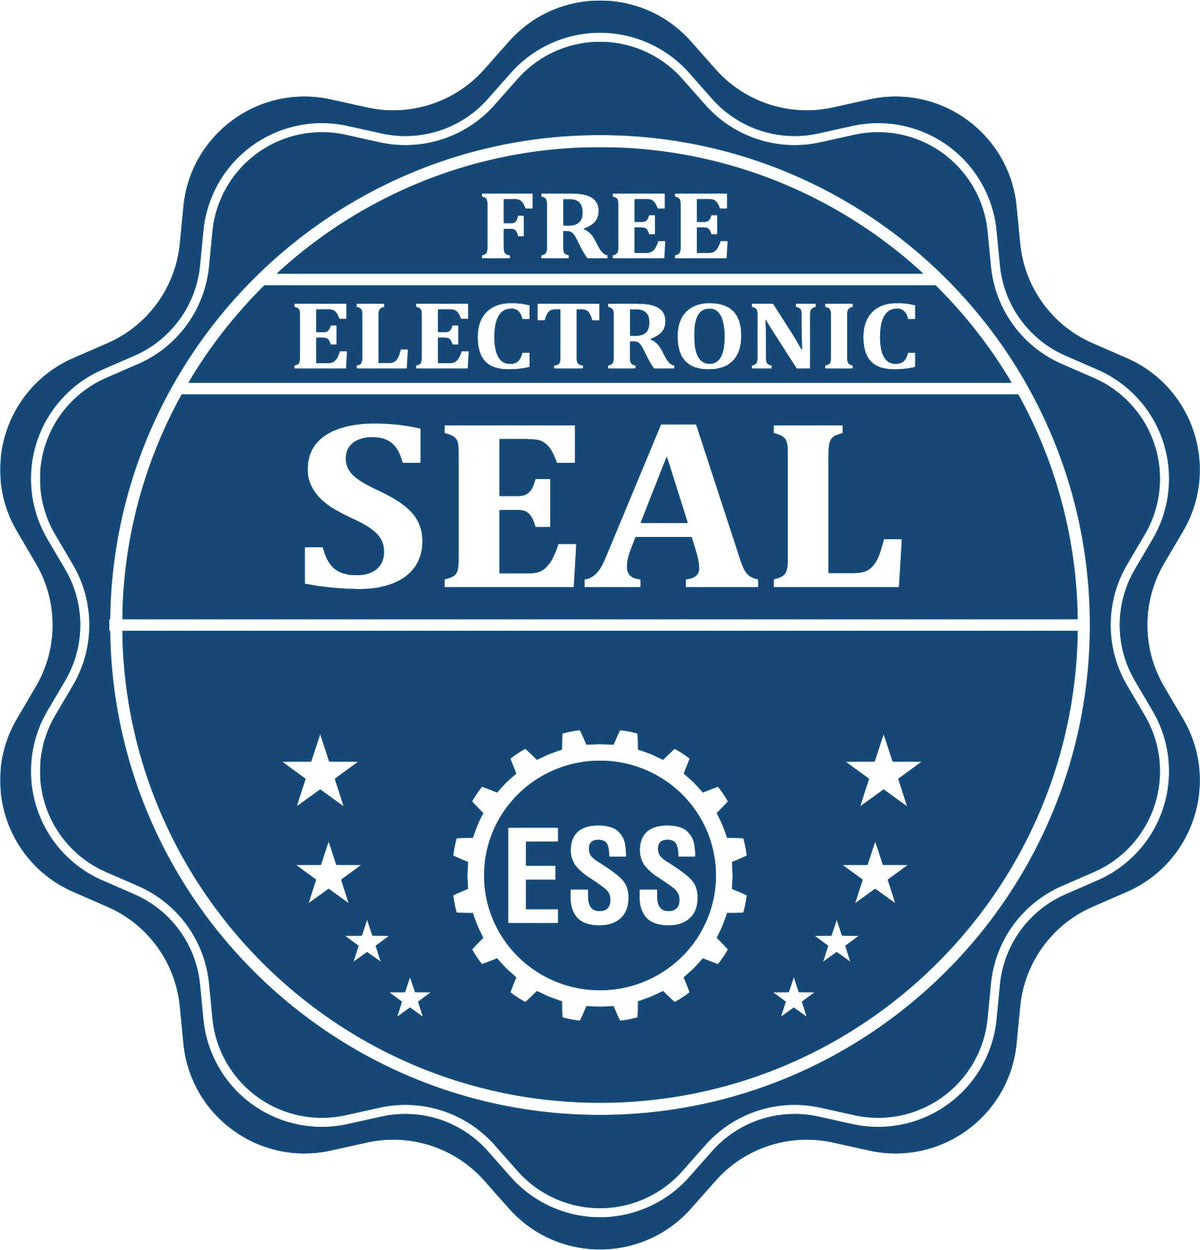 A badge showing a free electronic seal for the Hybrid Pennsylvania Geologist Seal with stars and the ESS gear on the emblem.